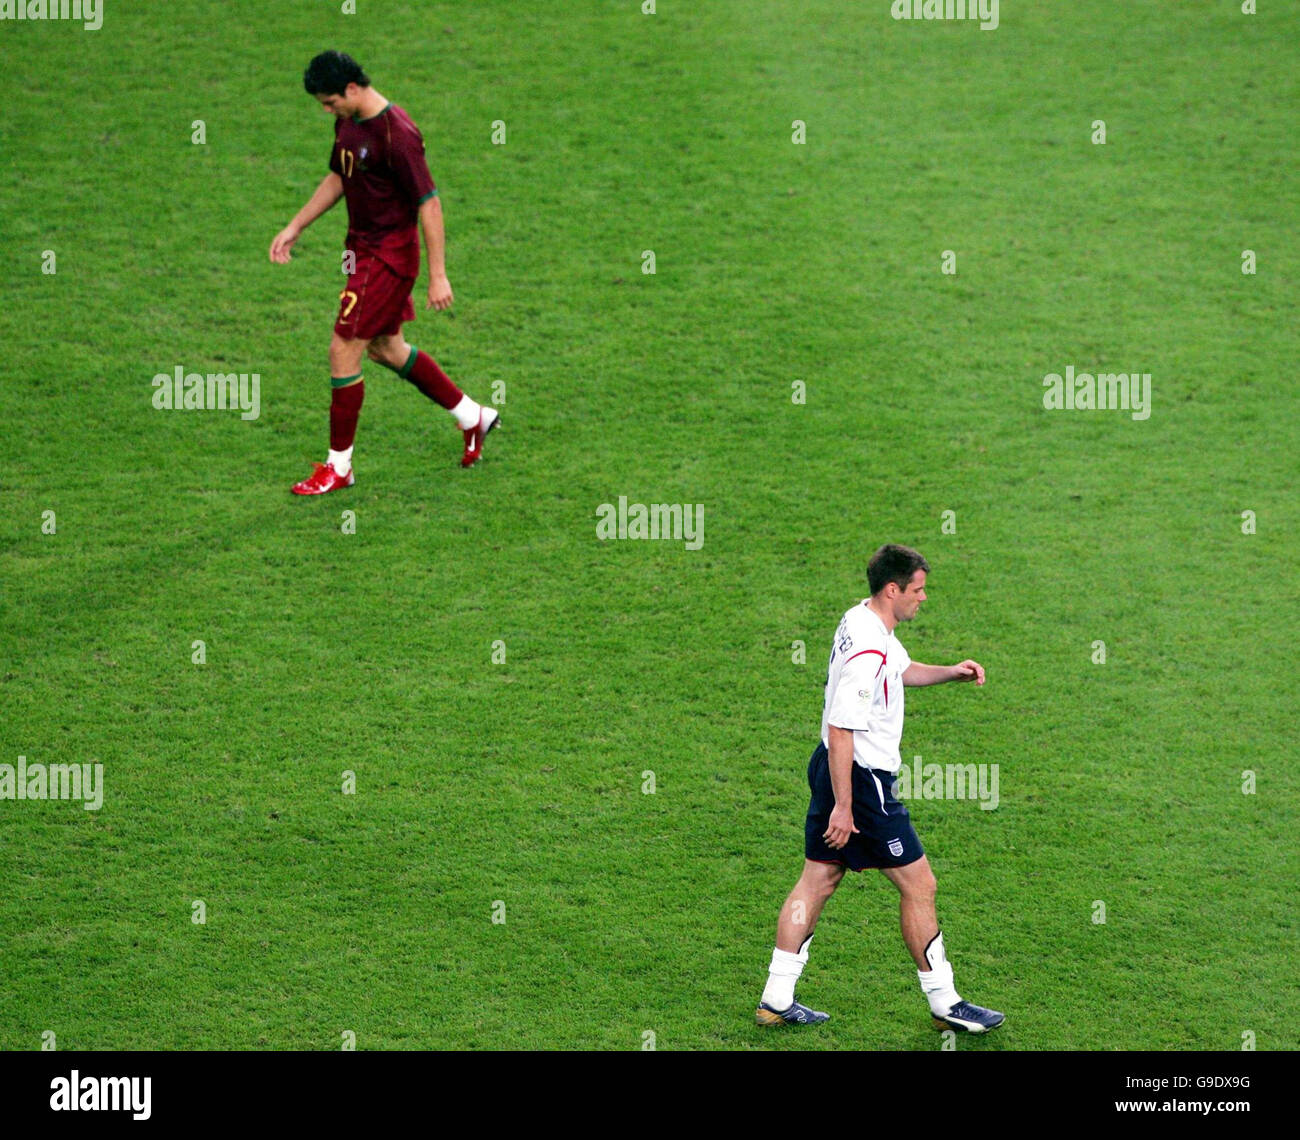 England's Jamie Carragher shows his dejection after his missed penalty as Portugal's Cristiano Ronaldo (top) walks forward to score the winning goal in penalty shoot-out during the Quarter Final match at the FIFA World Cup Stadium in Gelsenkirchen, Germany. Picture date: Saturday July 1, 2006. Stock Photo